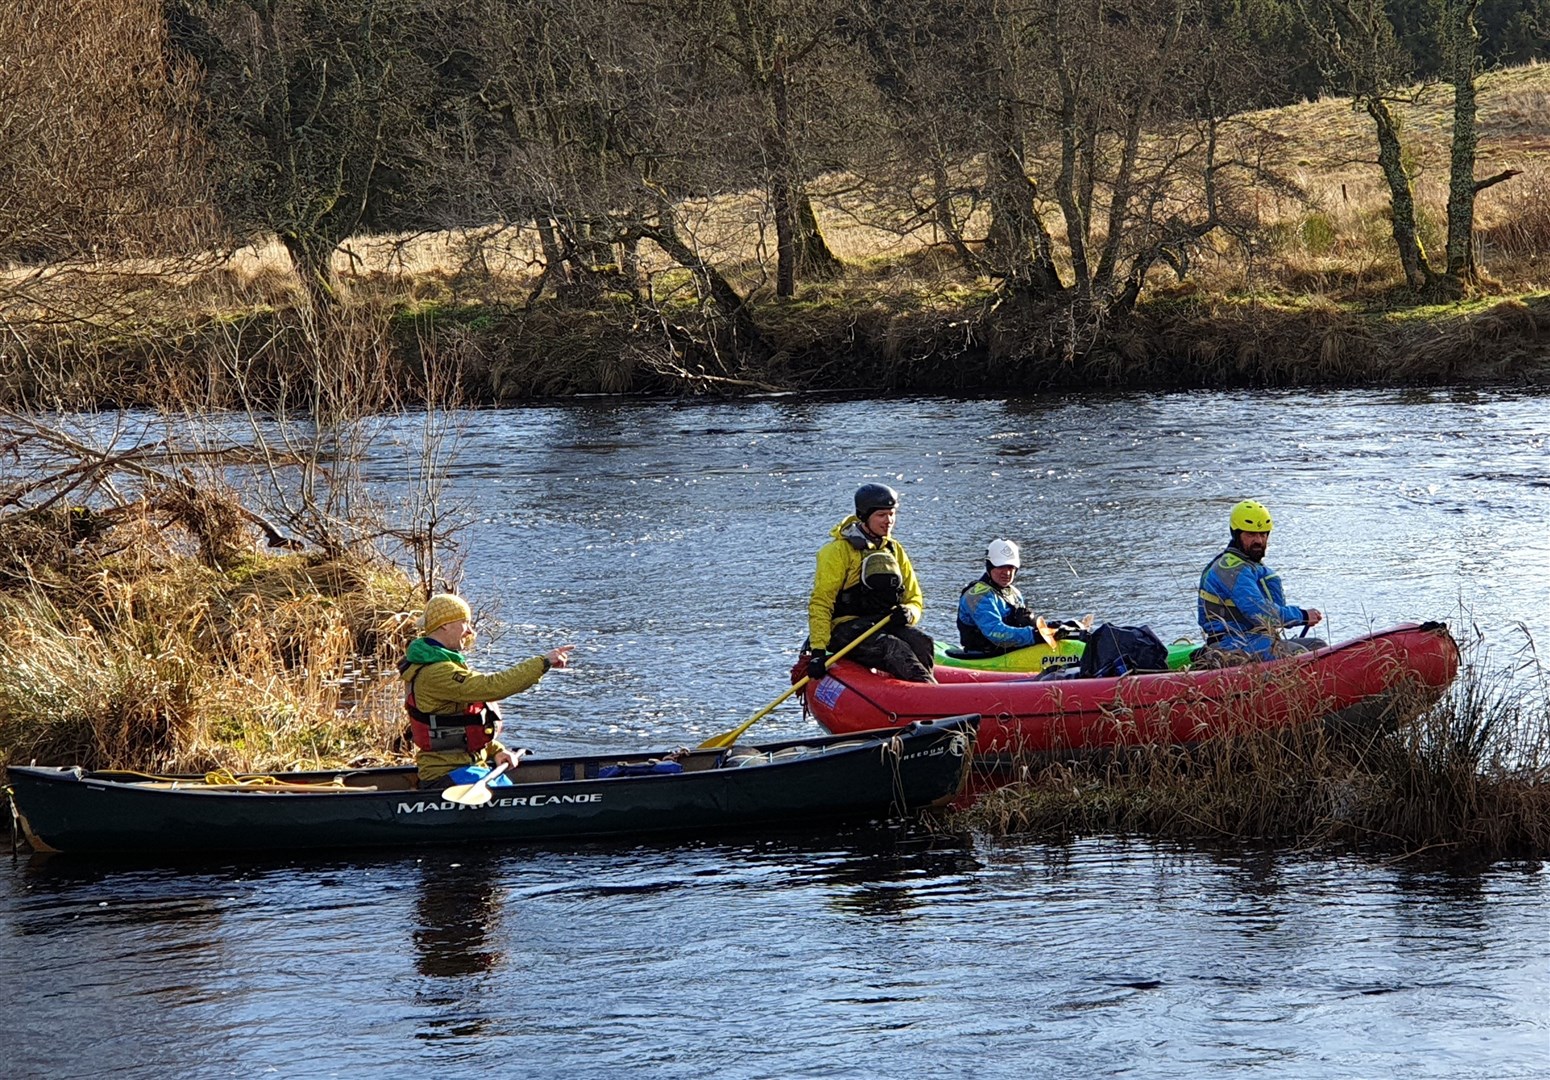 Glenmore Lodge staff assist with the search on the River Spey which is not far from where Mr Brannan was last seen.